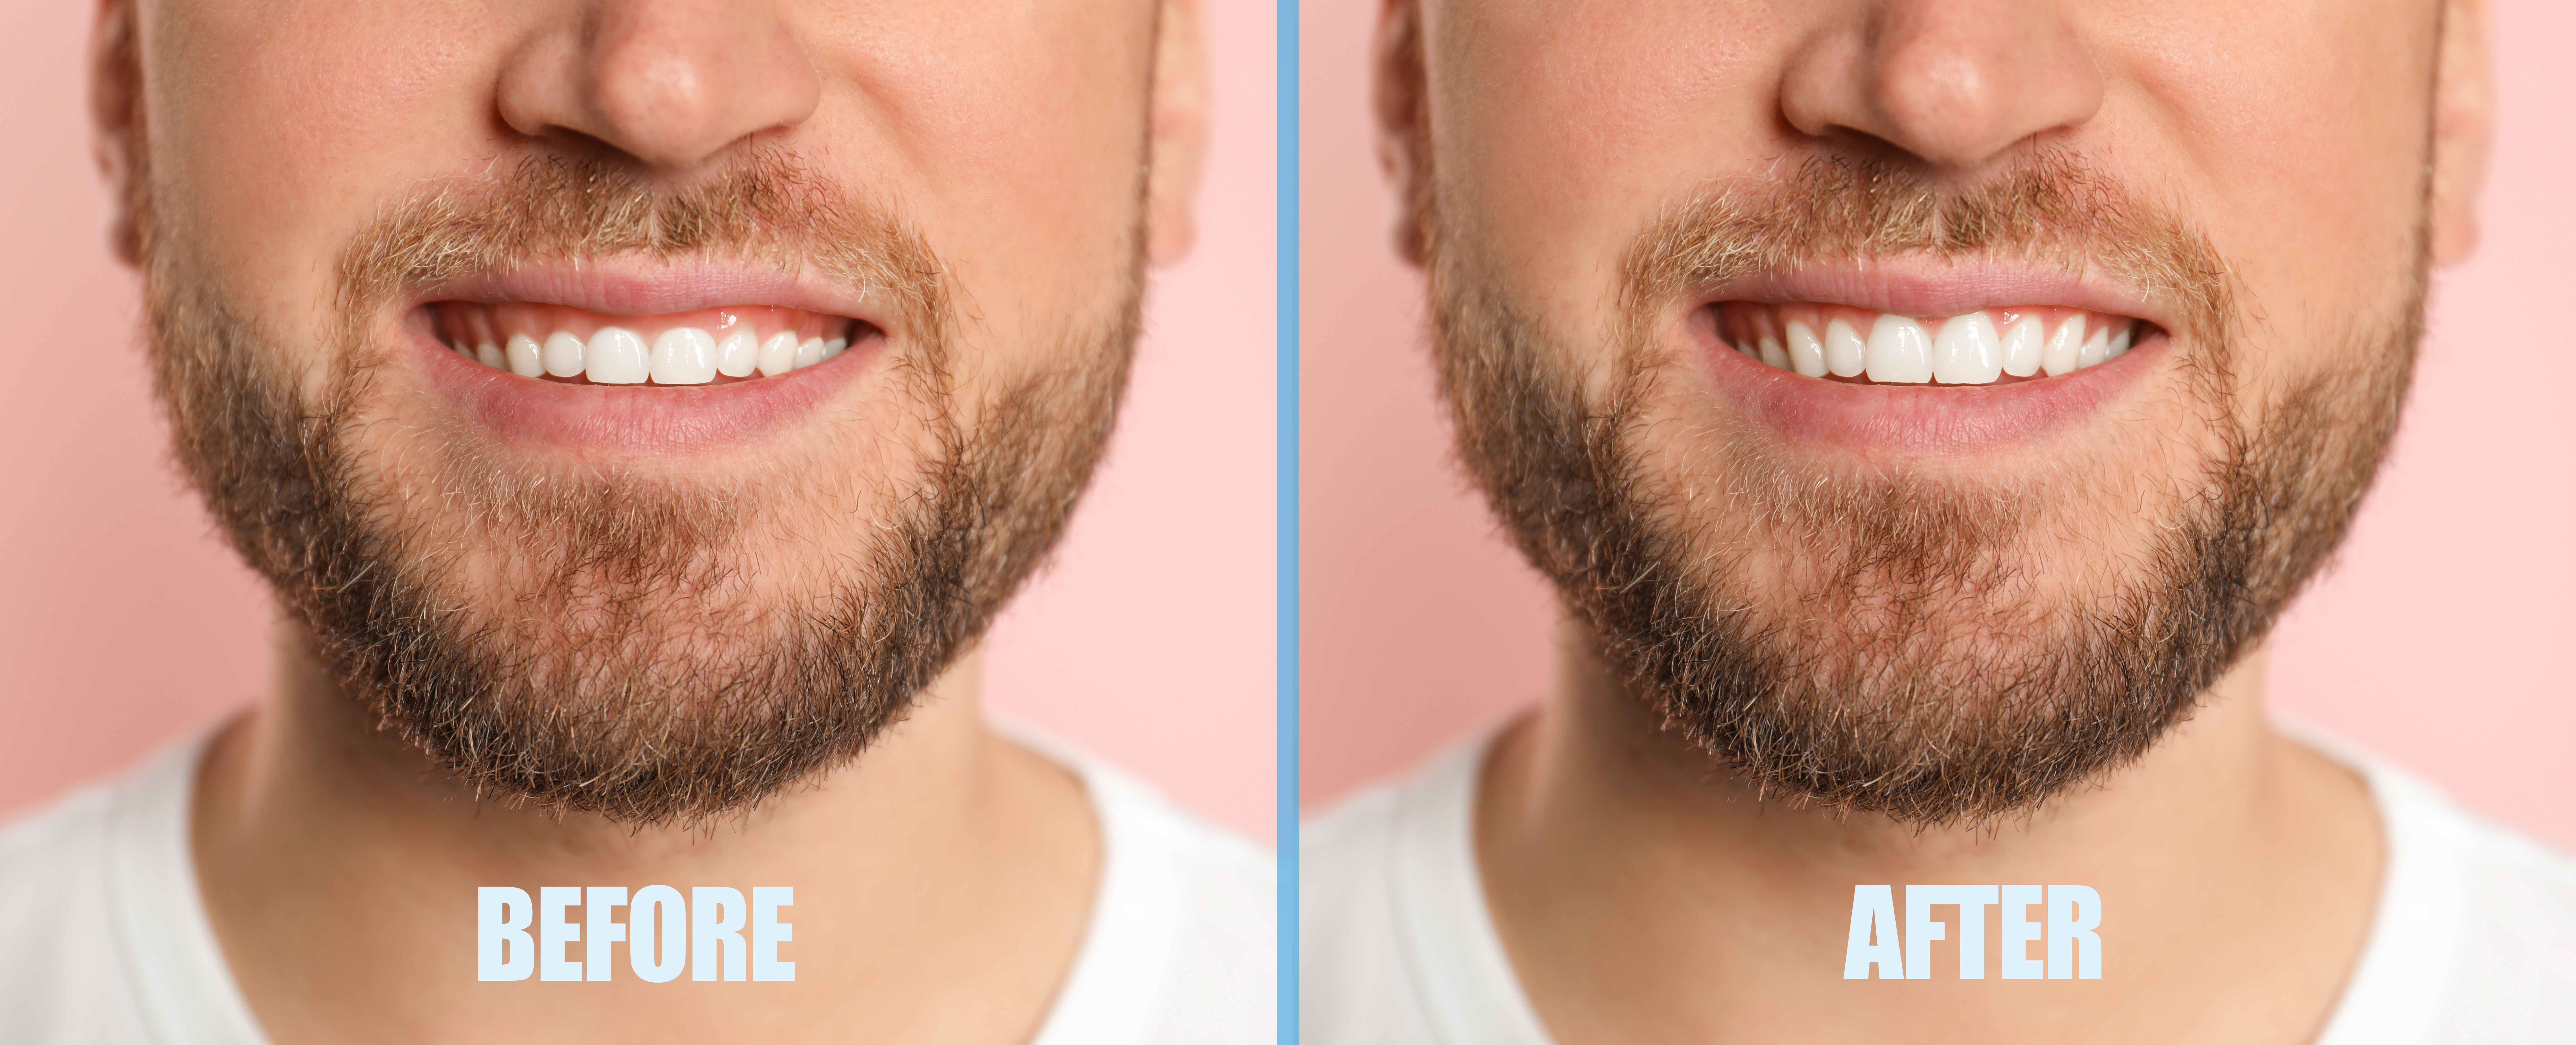 Gum Contour before and after images